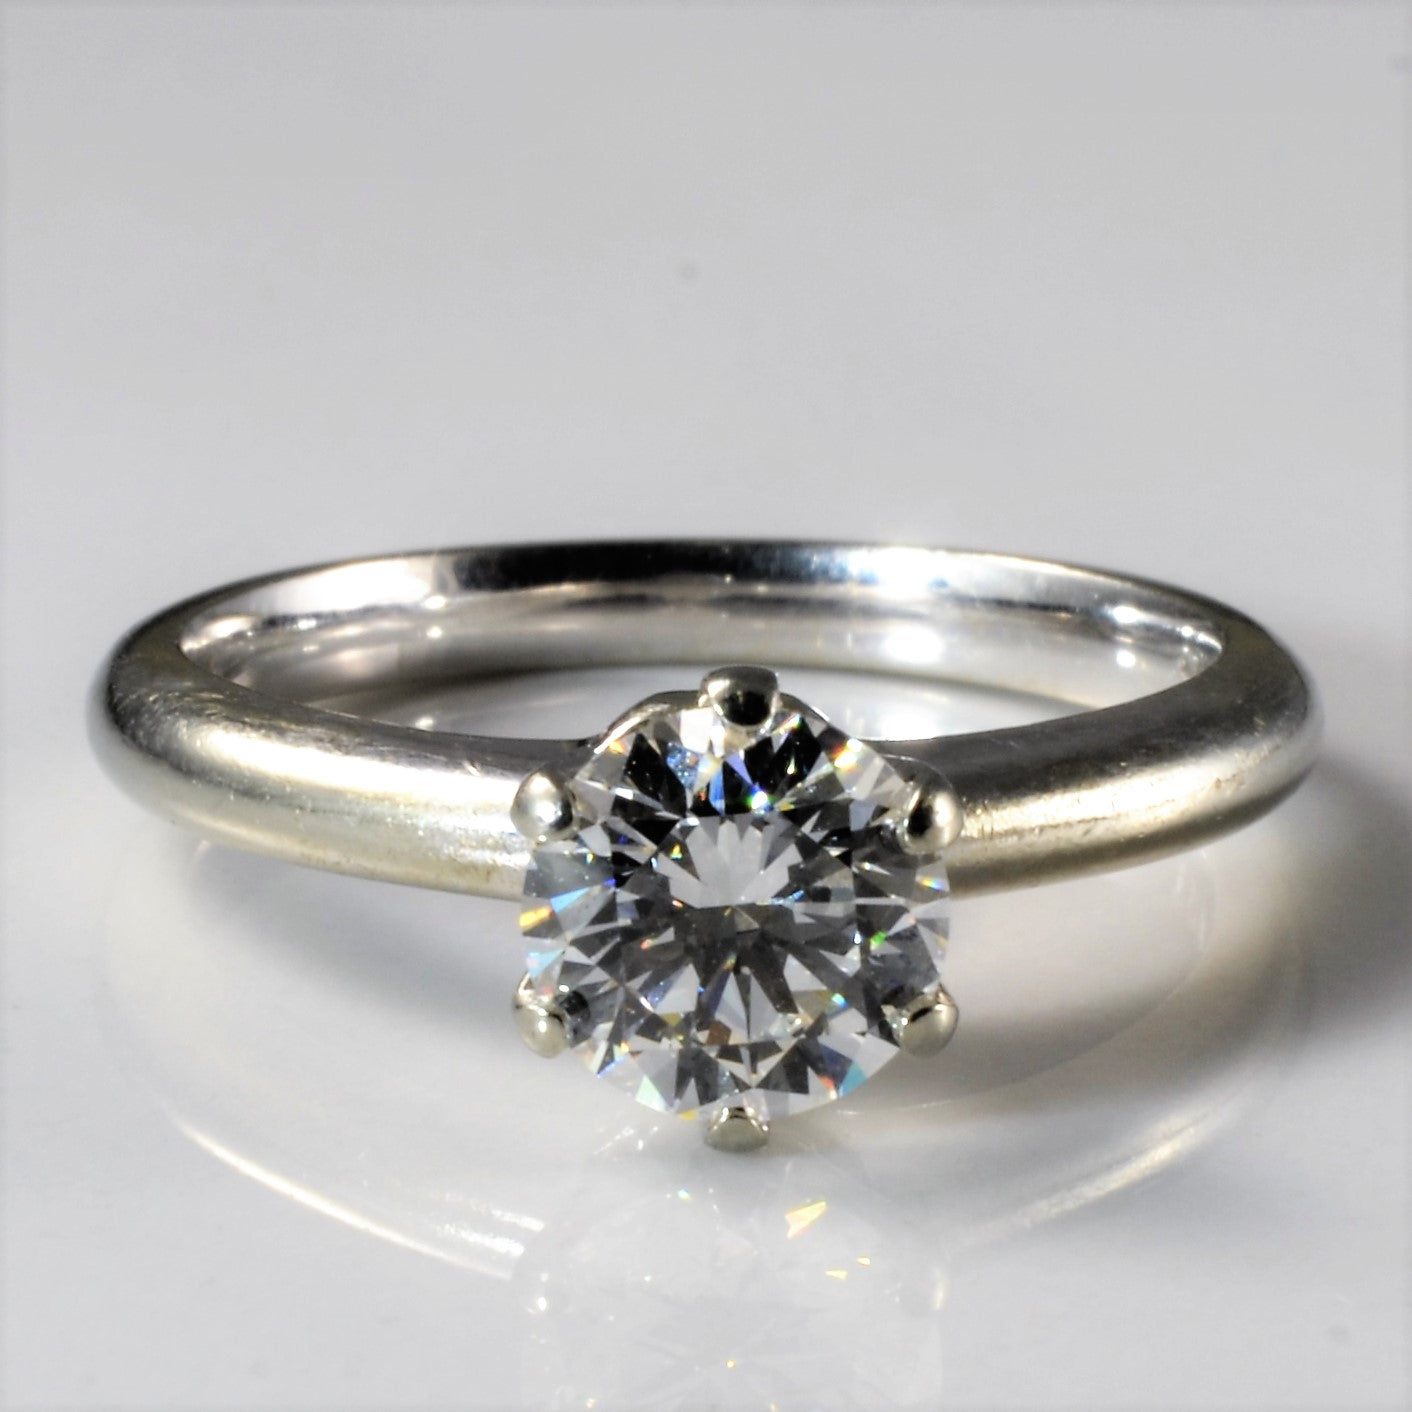 Six Prong Solitaire Diamond Ring | 0.86ct | SZ 5.5 |